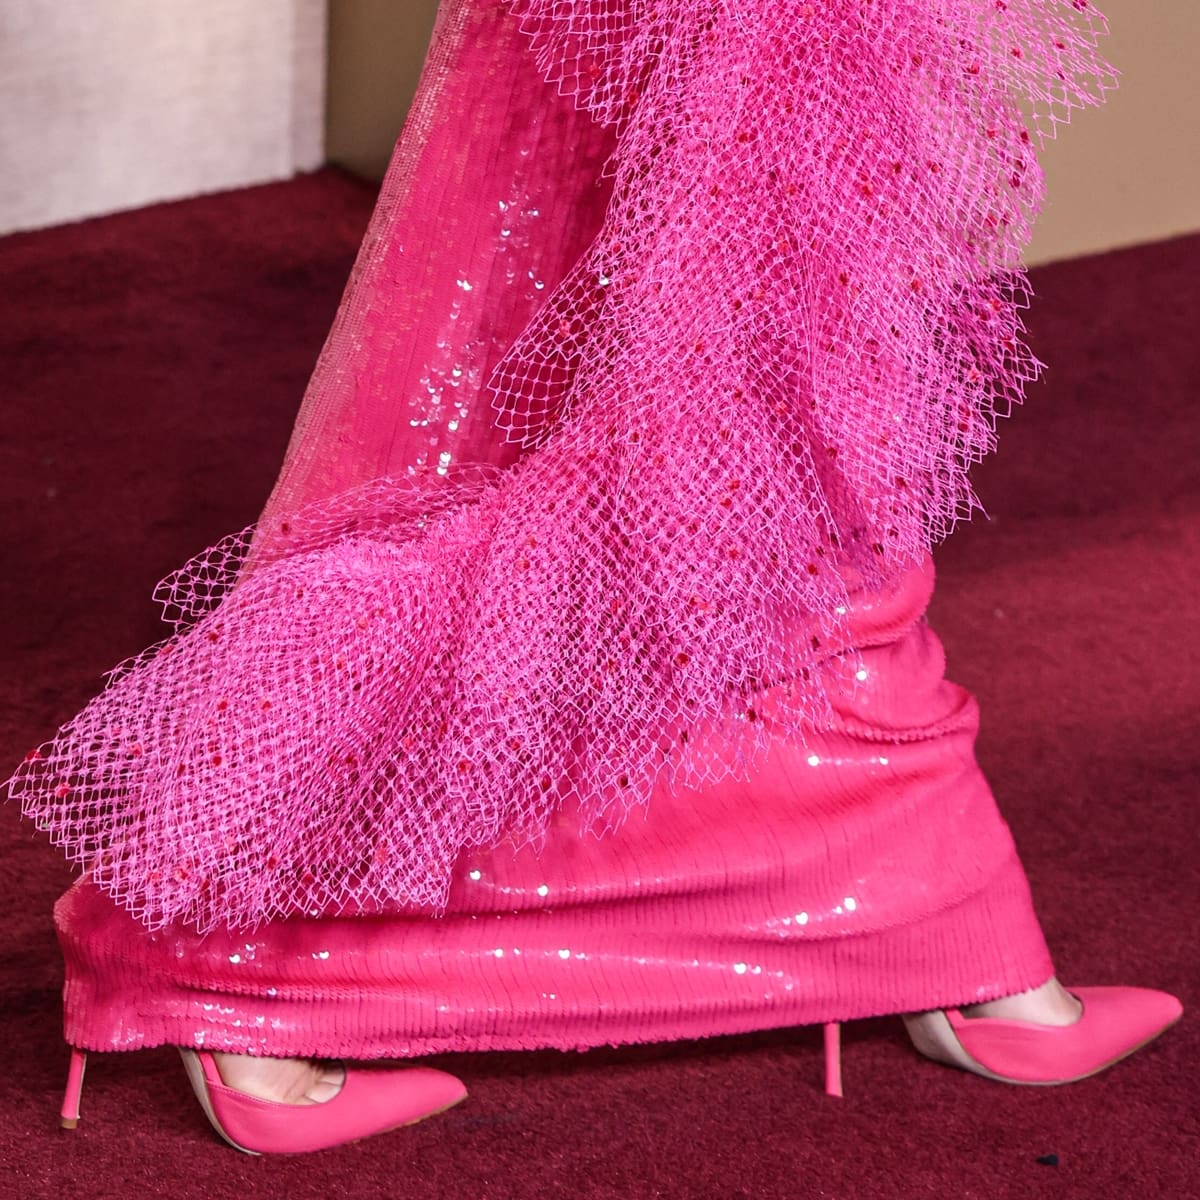 Classic Barbie glamour meets high fashion as Margot Robbie accessorizes with custom Manolo Blahnik hot pink pumps